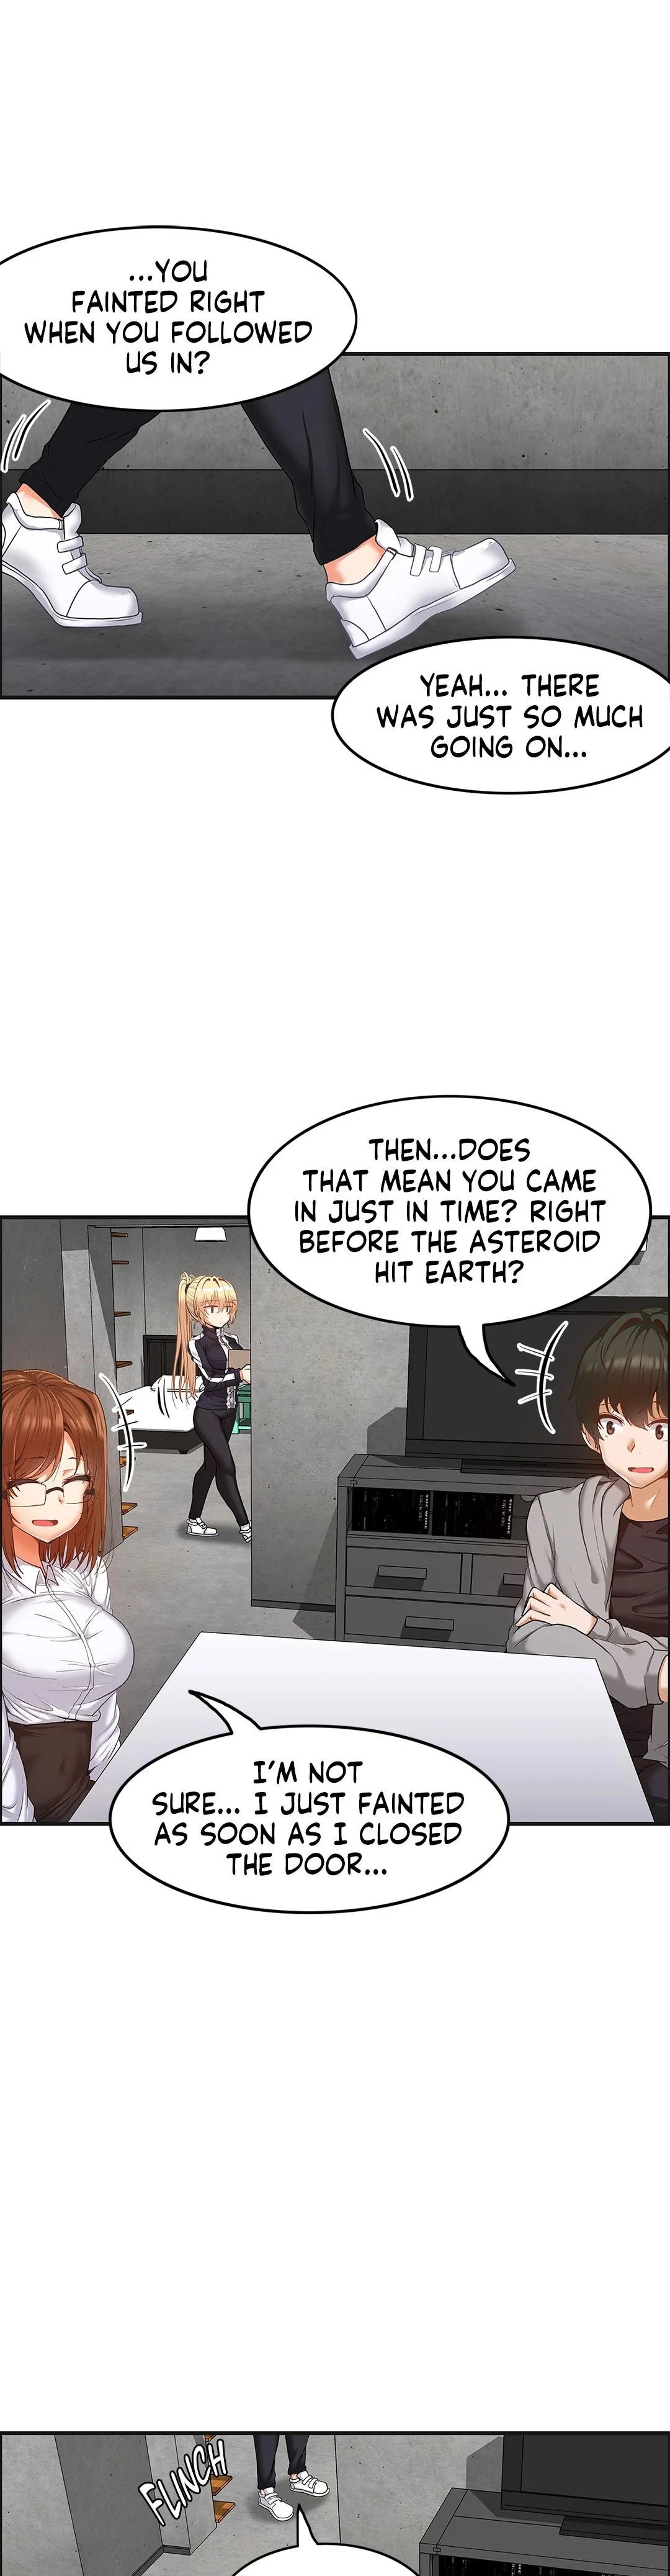 the-two-eves-the-girl-trapped-in-the-wall-chap-8-0